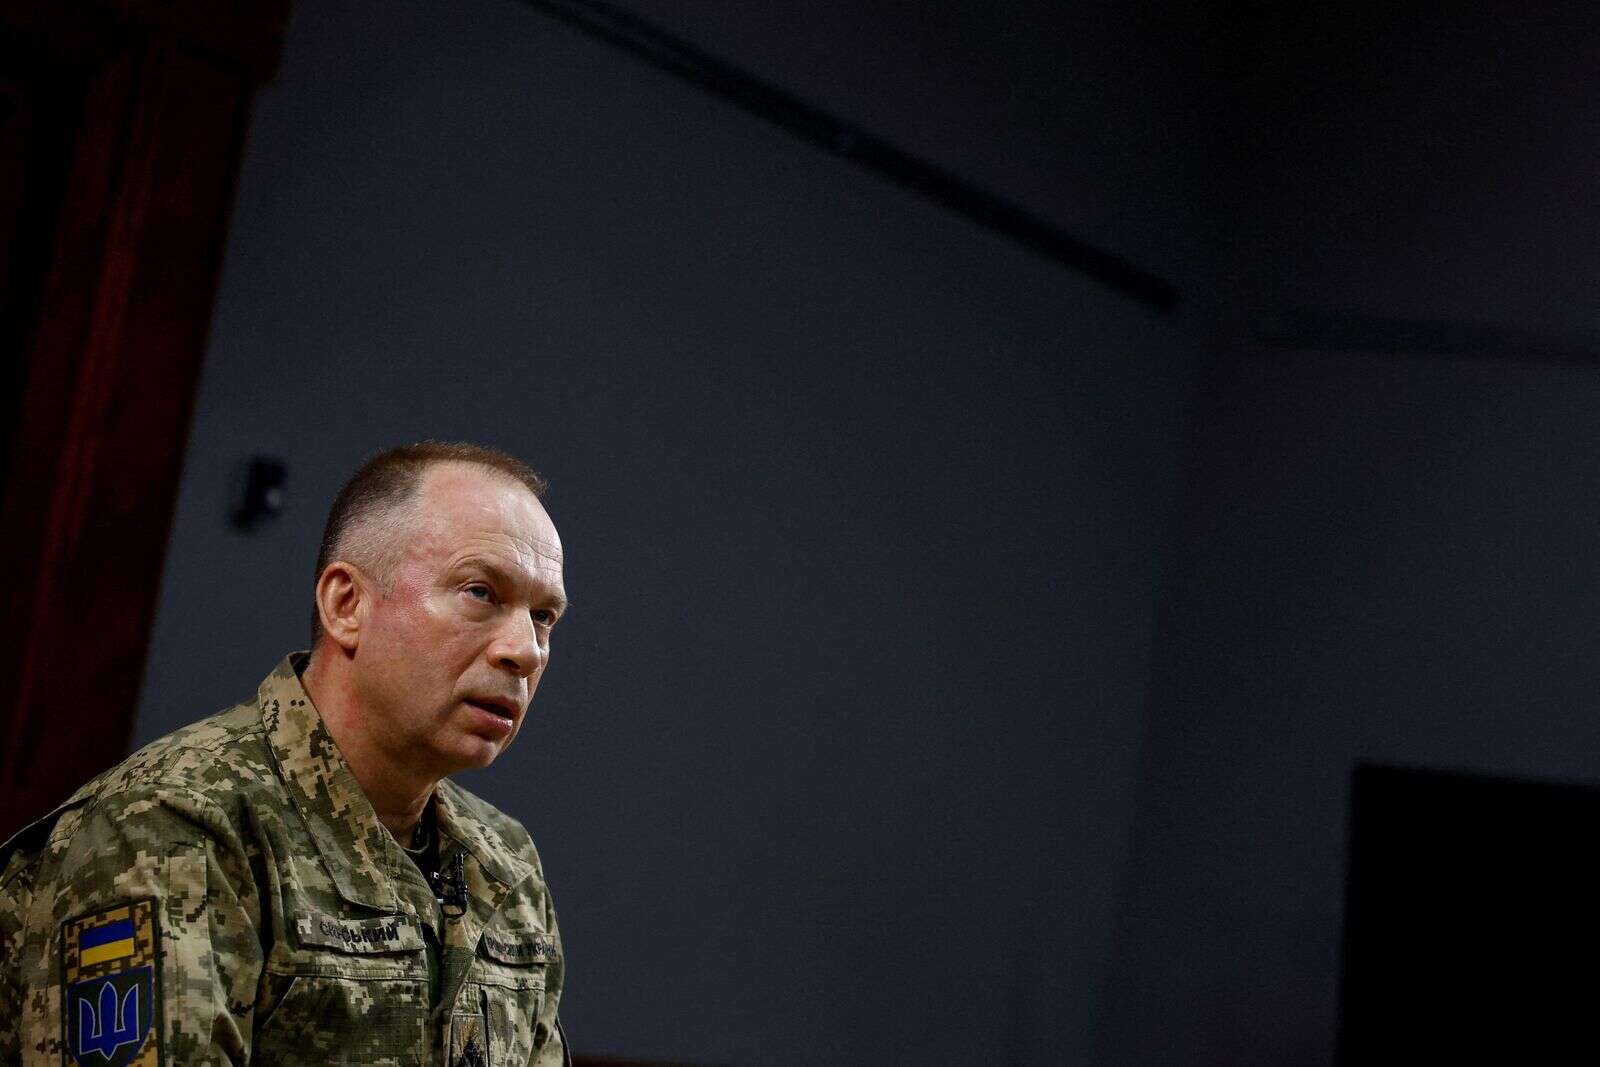 ukraine pulls back from three villages as eastern front worsens, top commander says